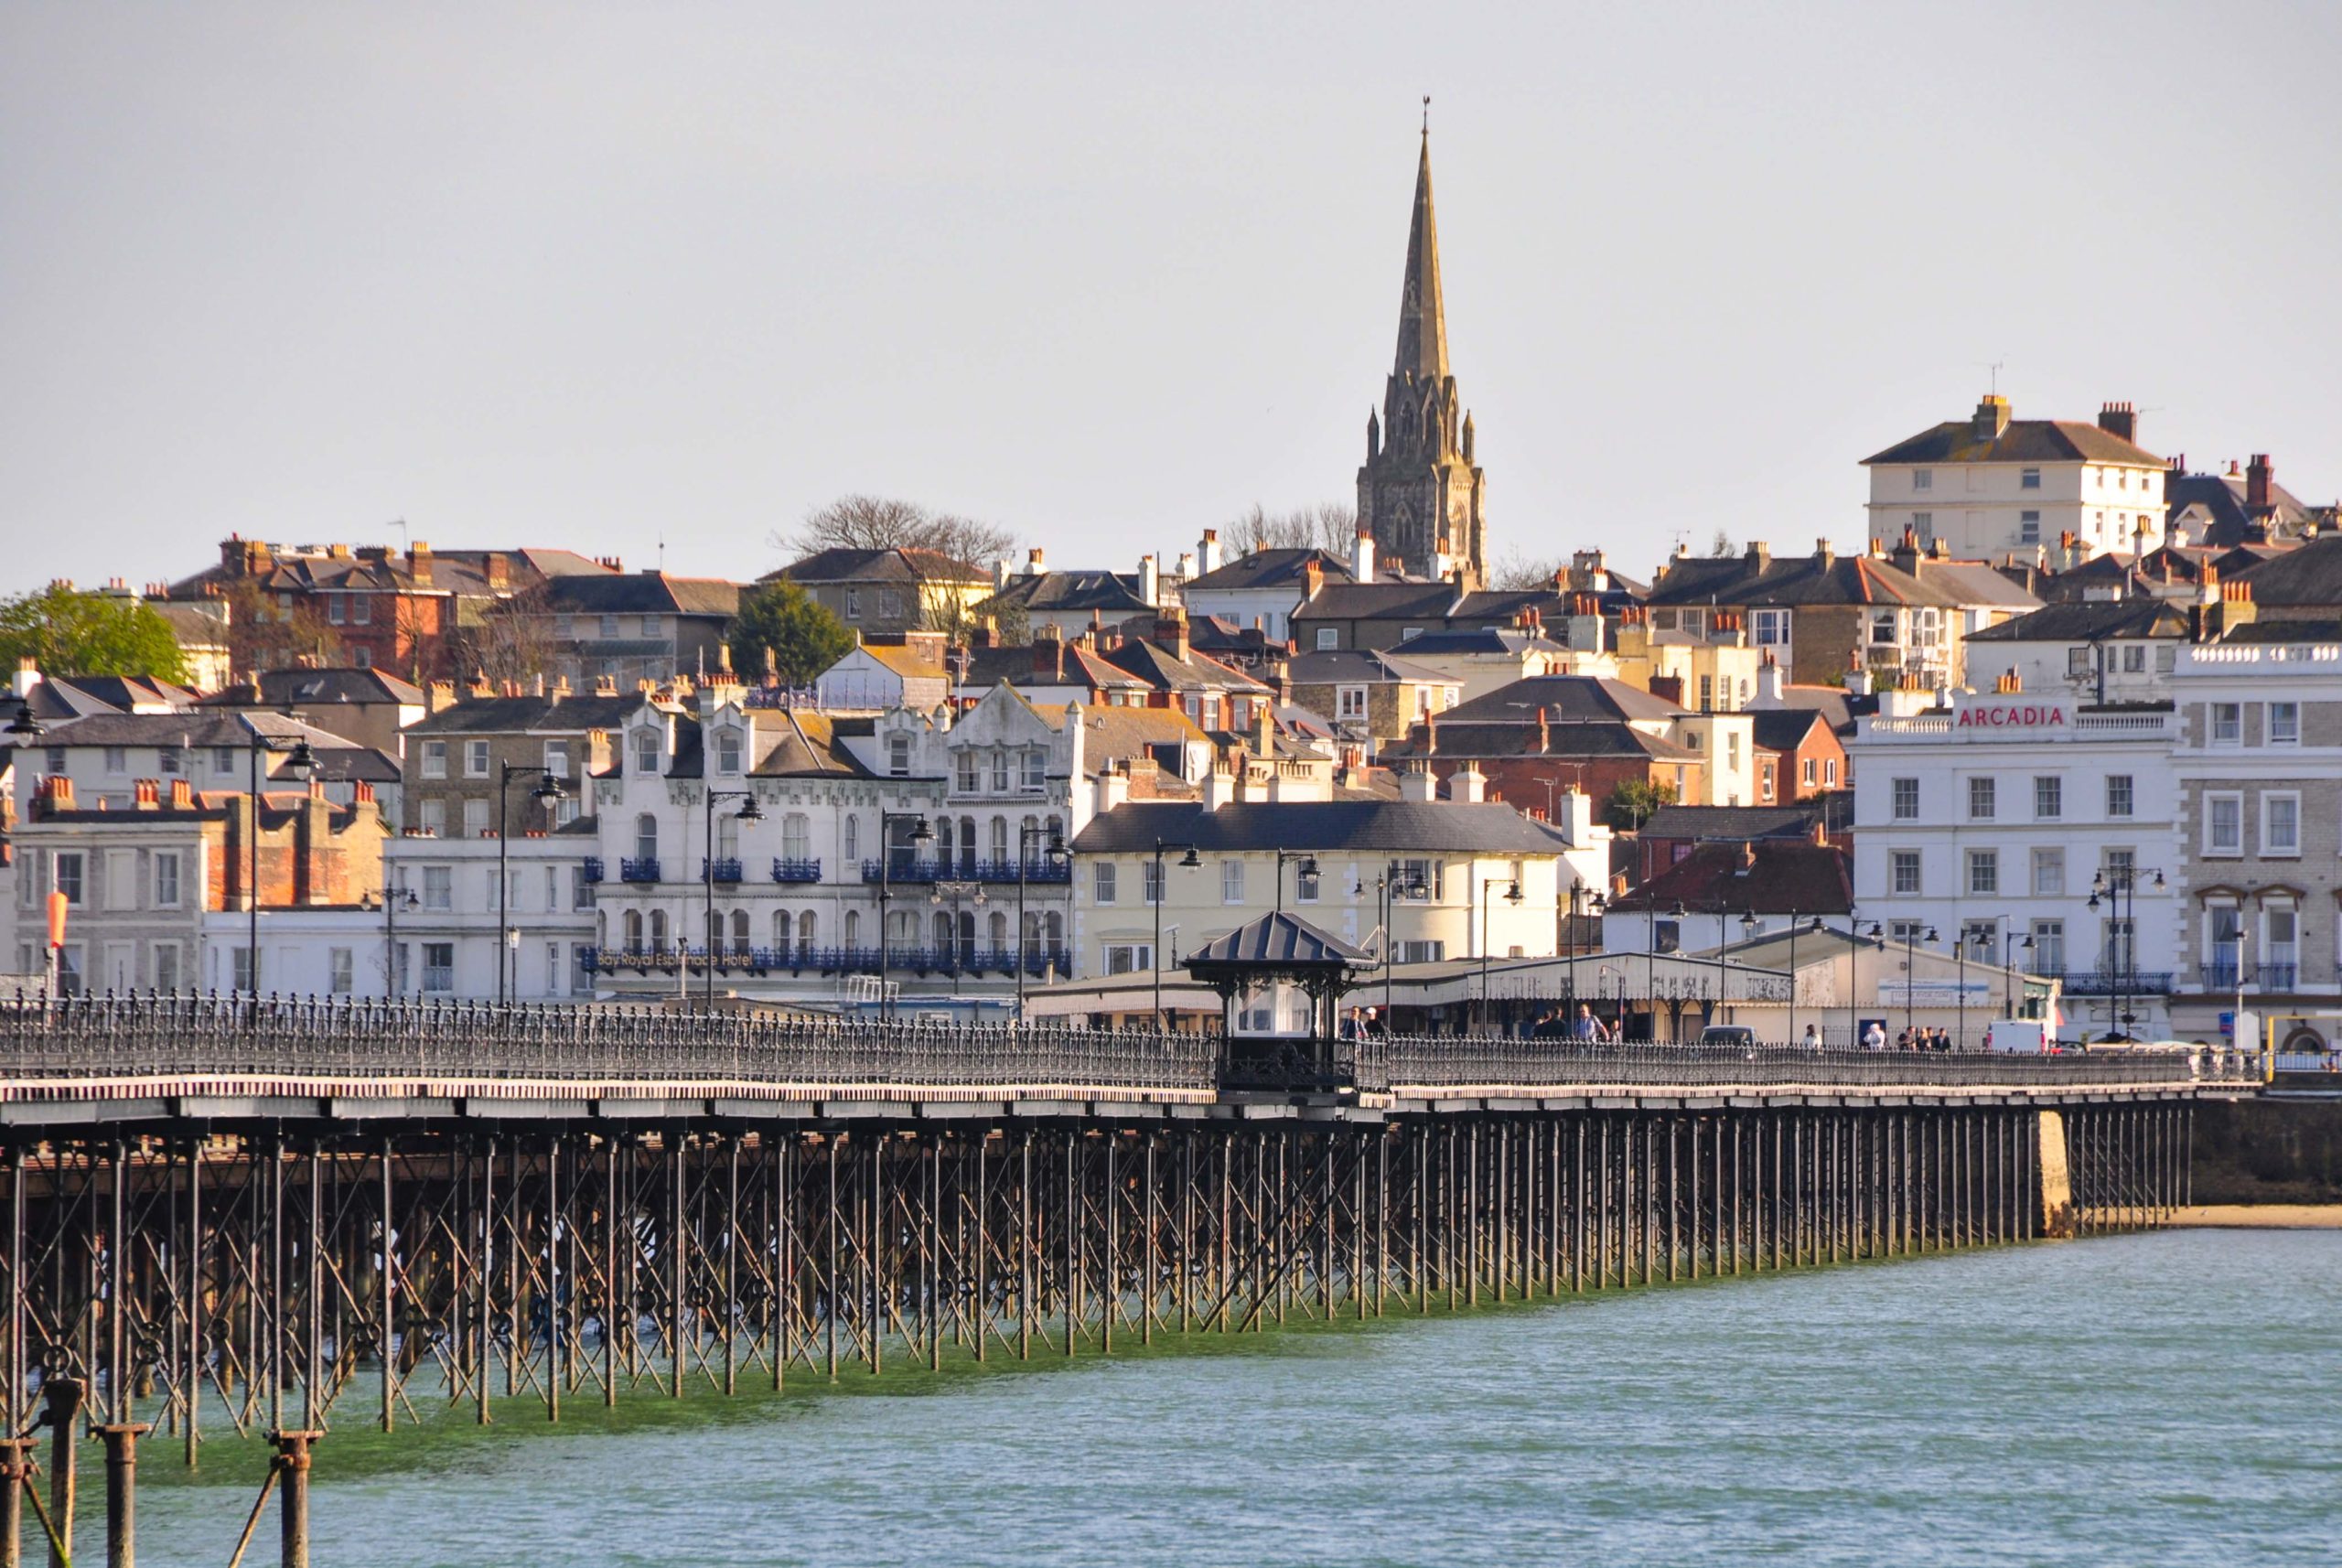 Ryde Pier © Lewis Clarke - licence [CC BY-SA 2.0] from Wikimedia Commons